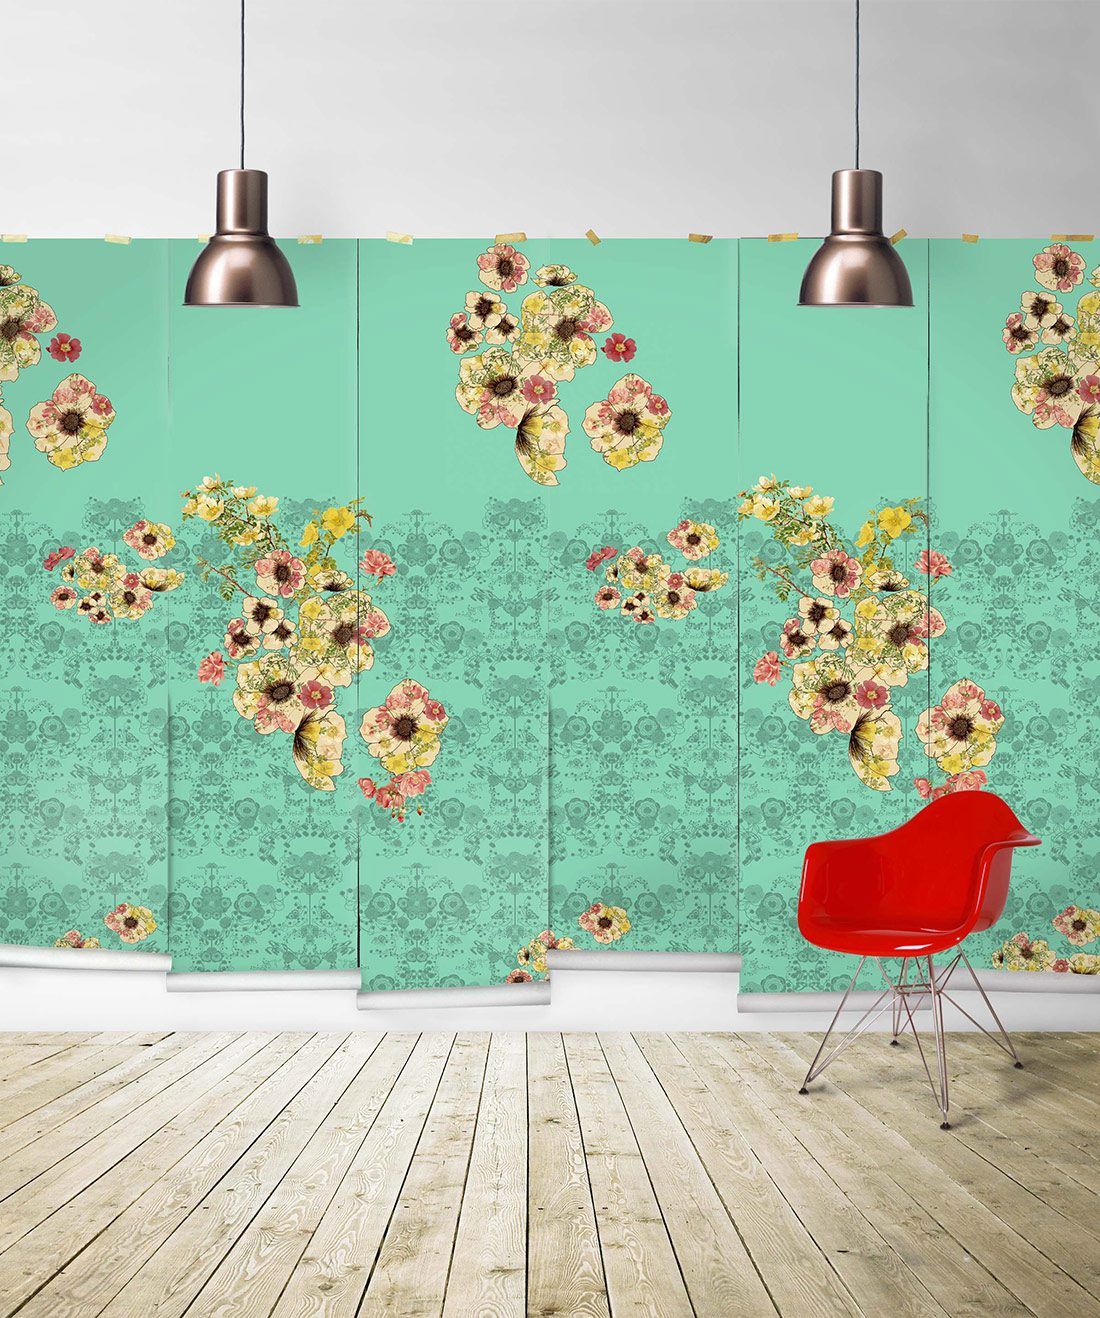 Gula is a Floral Wall Graphic